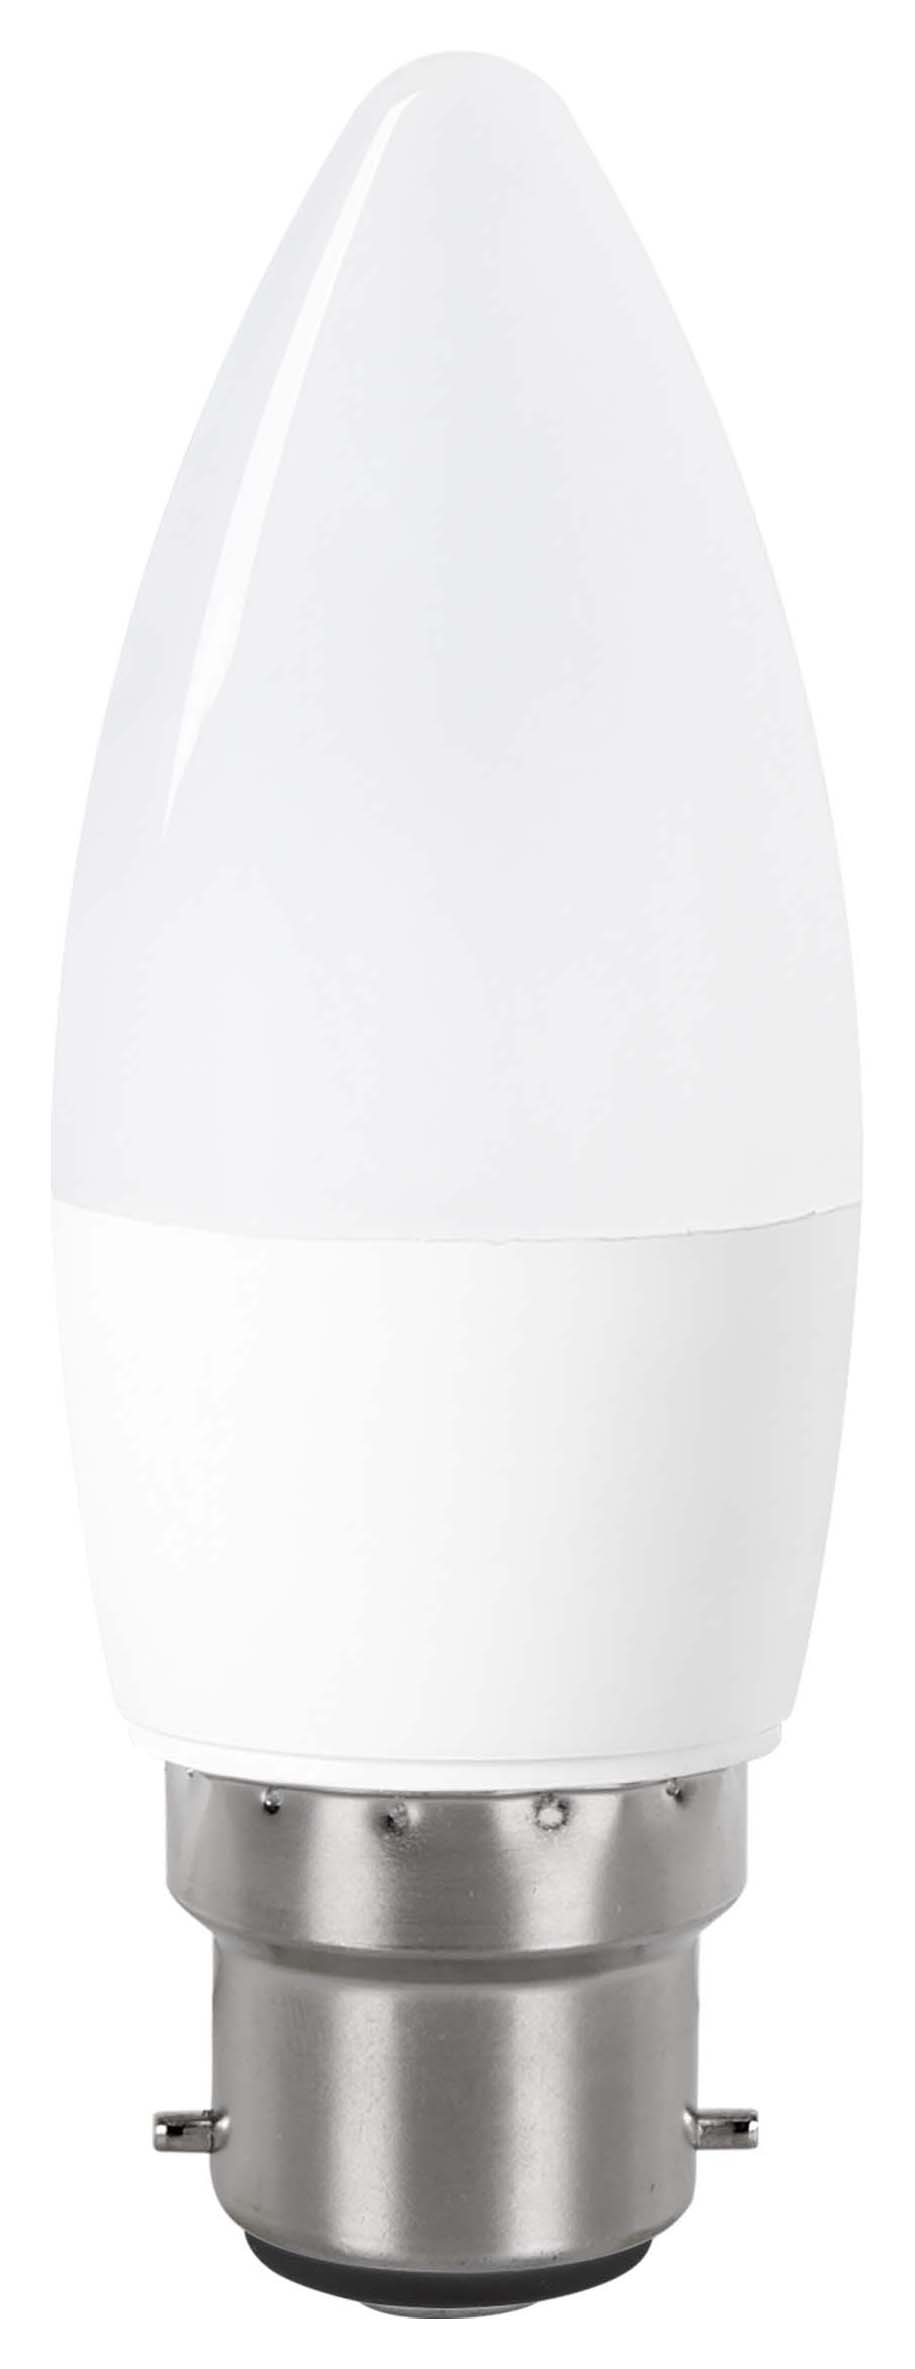 Image of Wickes Non-Dimmable Opal LED B22 Candle 4.9W Warm White Light Bulb